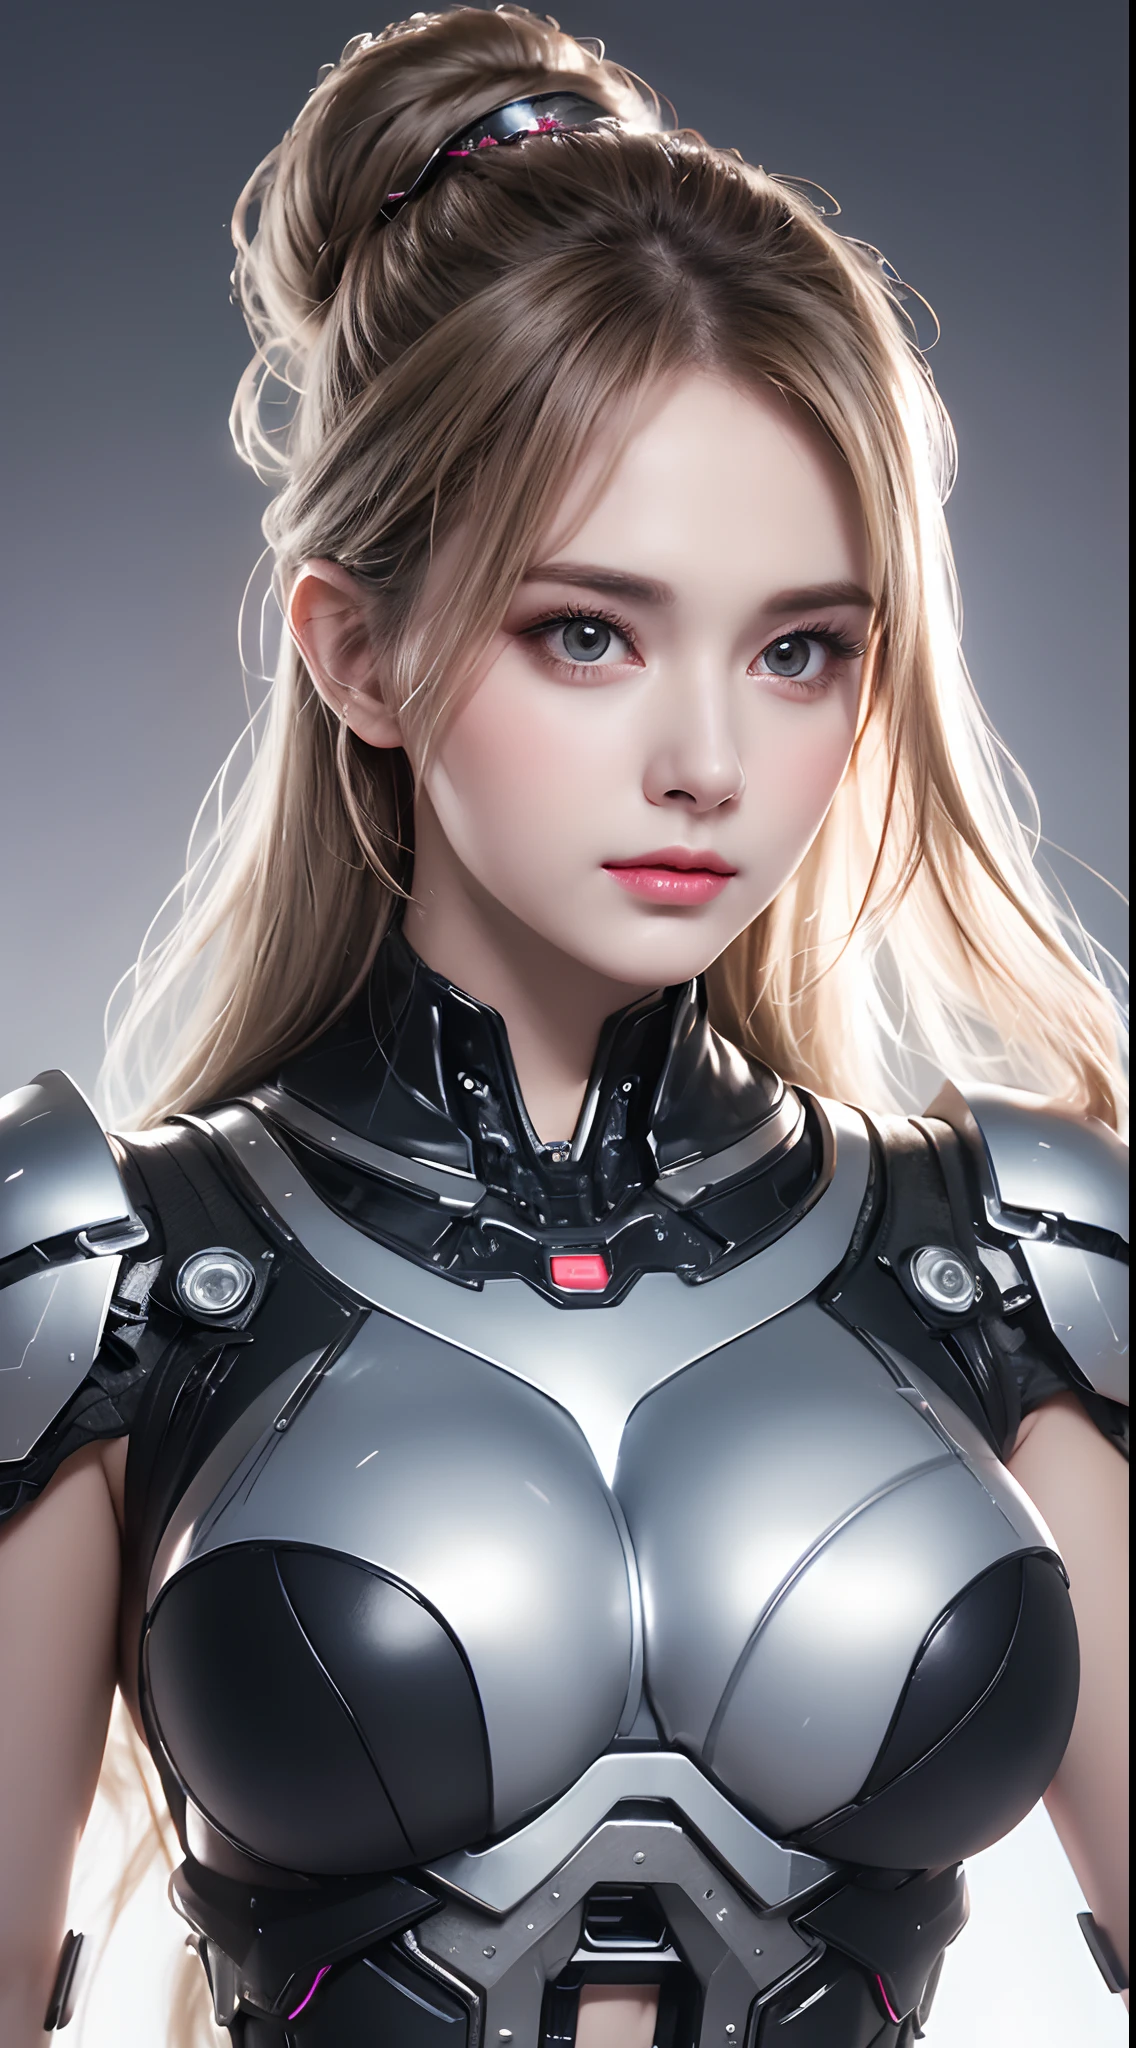 A close-up head and chest portrait of a pretty and cute woman, her chest adorned with pneumatic tubes that give her a unique and futuristic appearance. The highly detailed digital rendering captures every aspect of her beauty, from her delicate features to the intricate tubes.